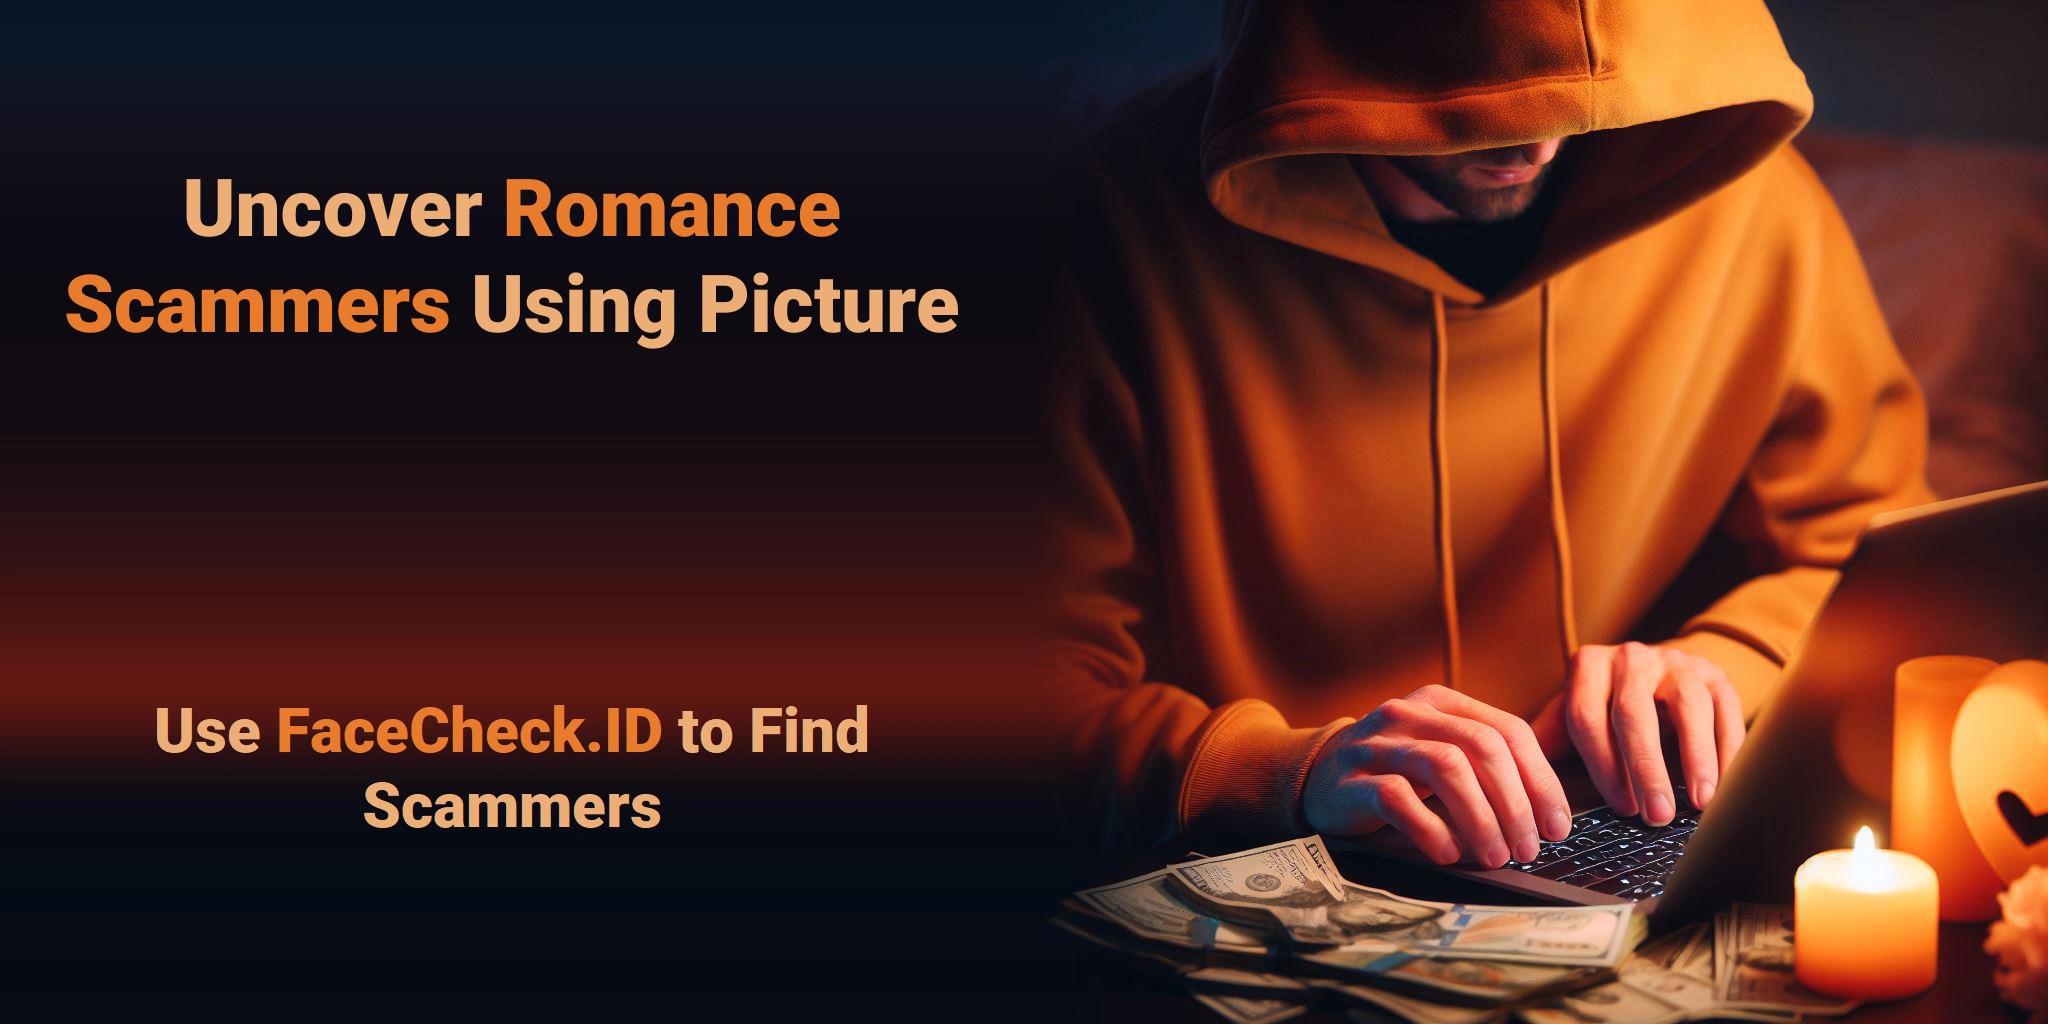 Uncover Romance Scammers Using Picture Use FaceCheck.ID to Find Scammers